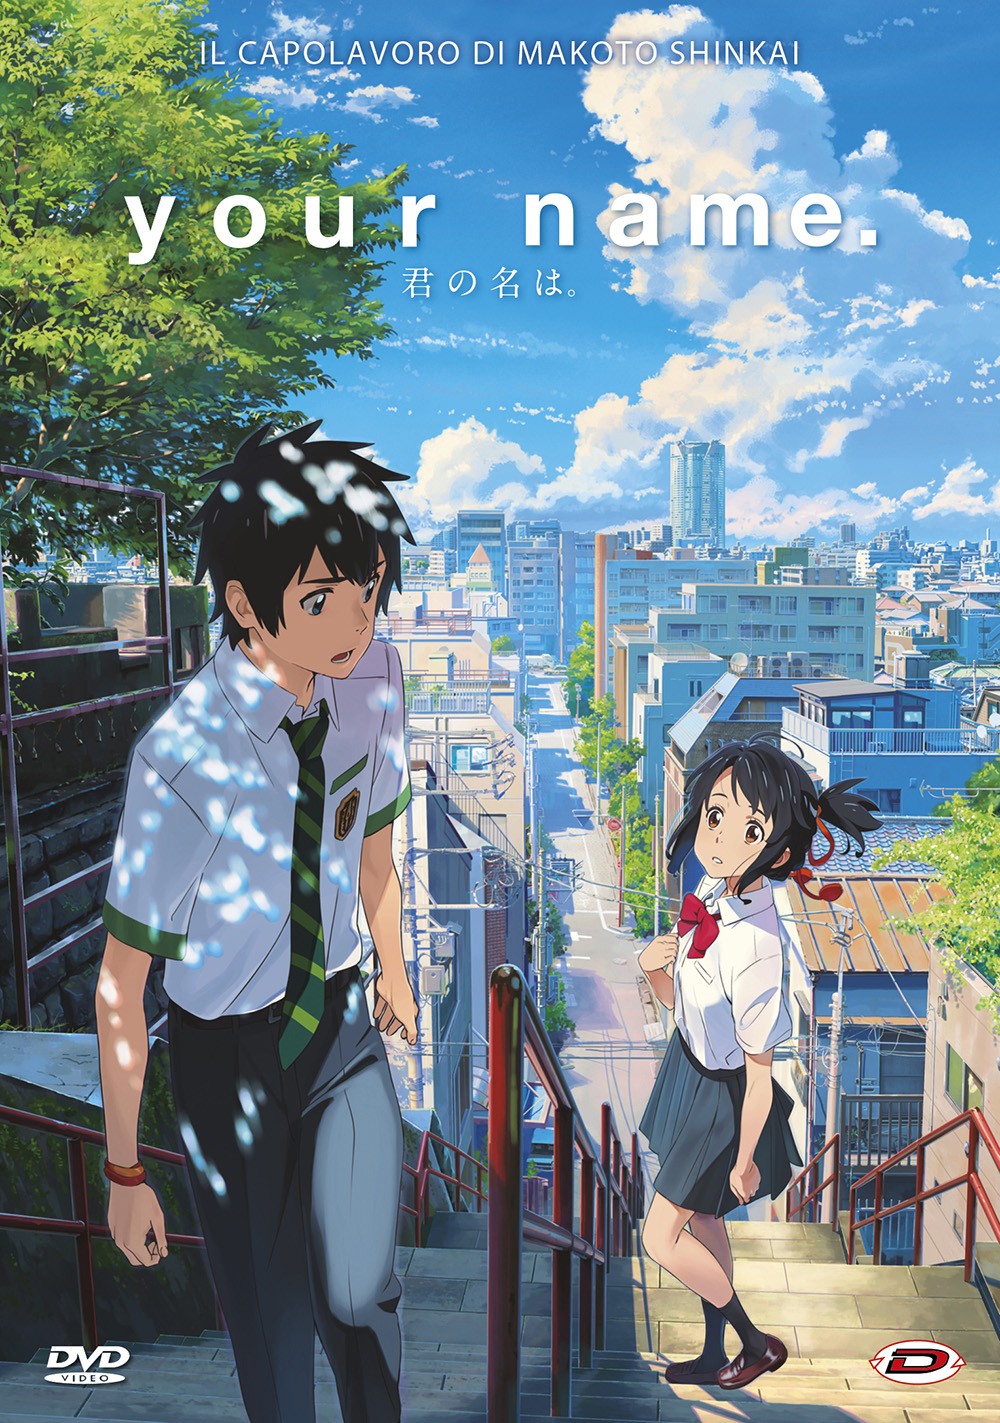 Your Name - Anime Movie Poster